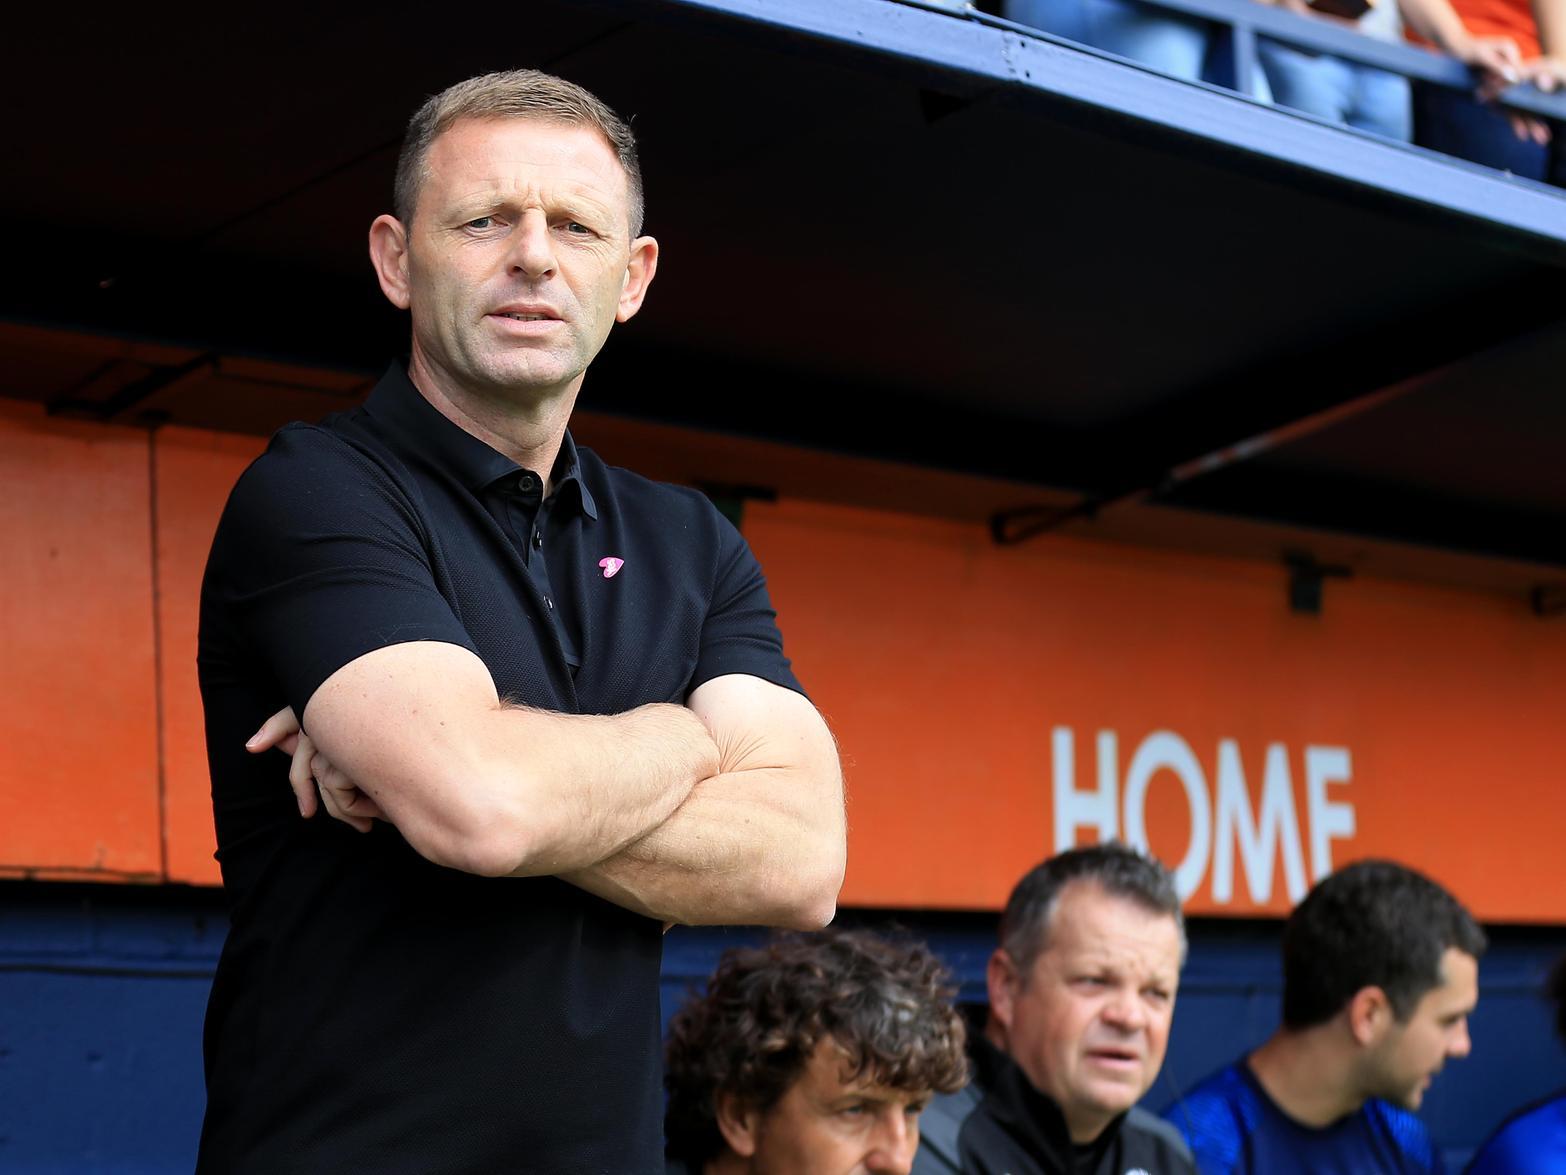 Luton Town boss Graeme Jones has claimed his squads unwavering belief has been pivotal to their recent improvement, with six points in two games giving the Hatters a fighting chance of avoiding relegation. (Luton Today)